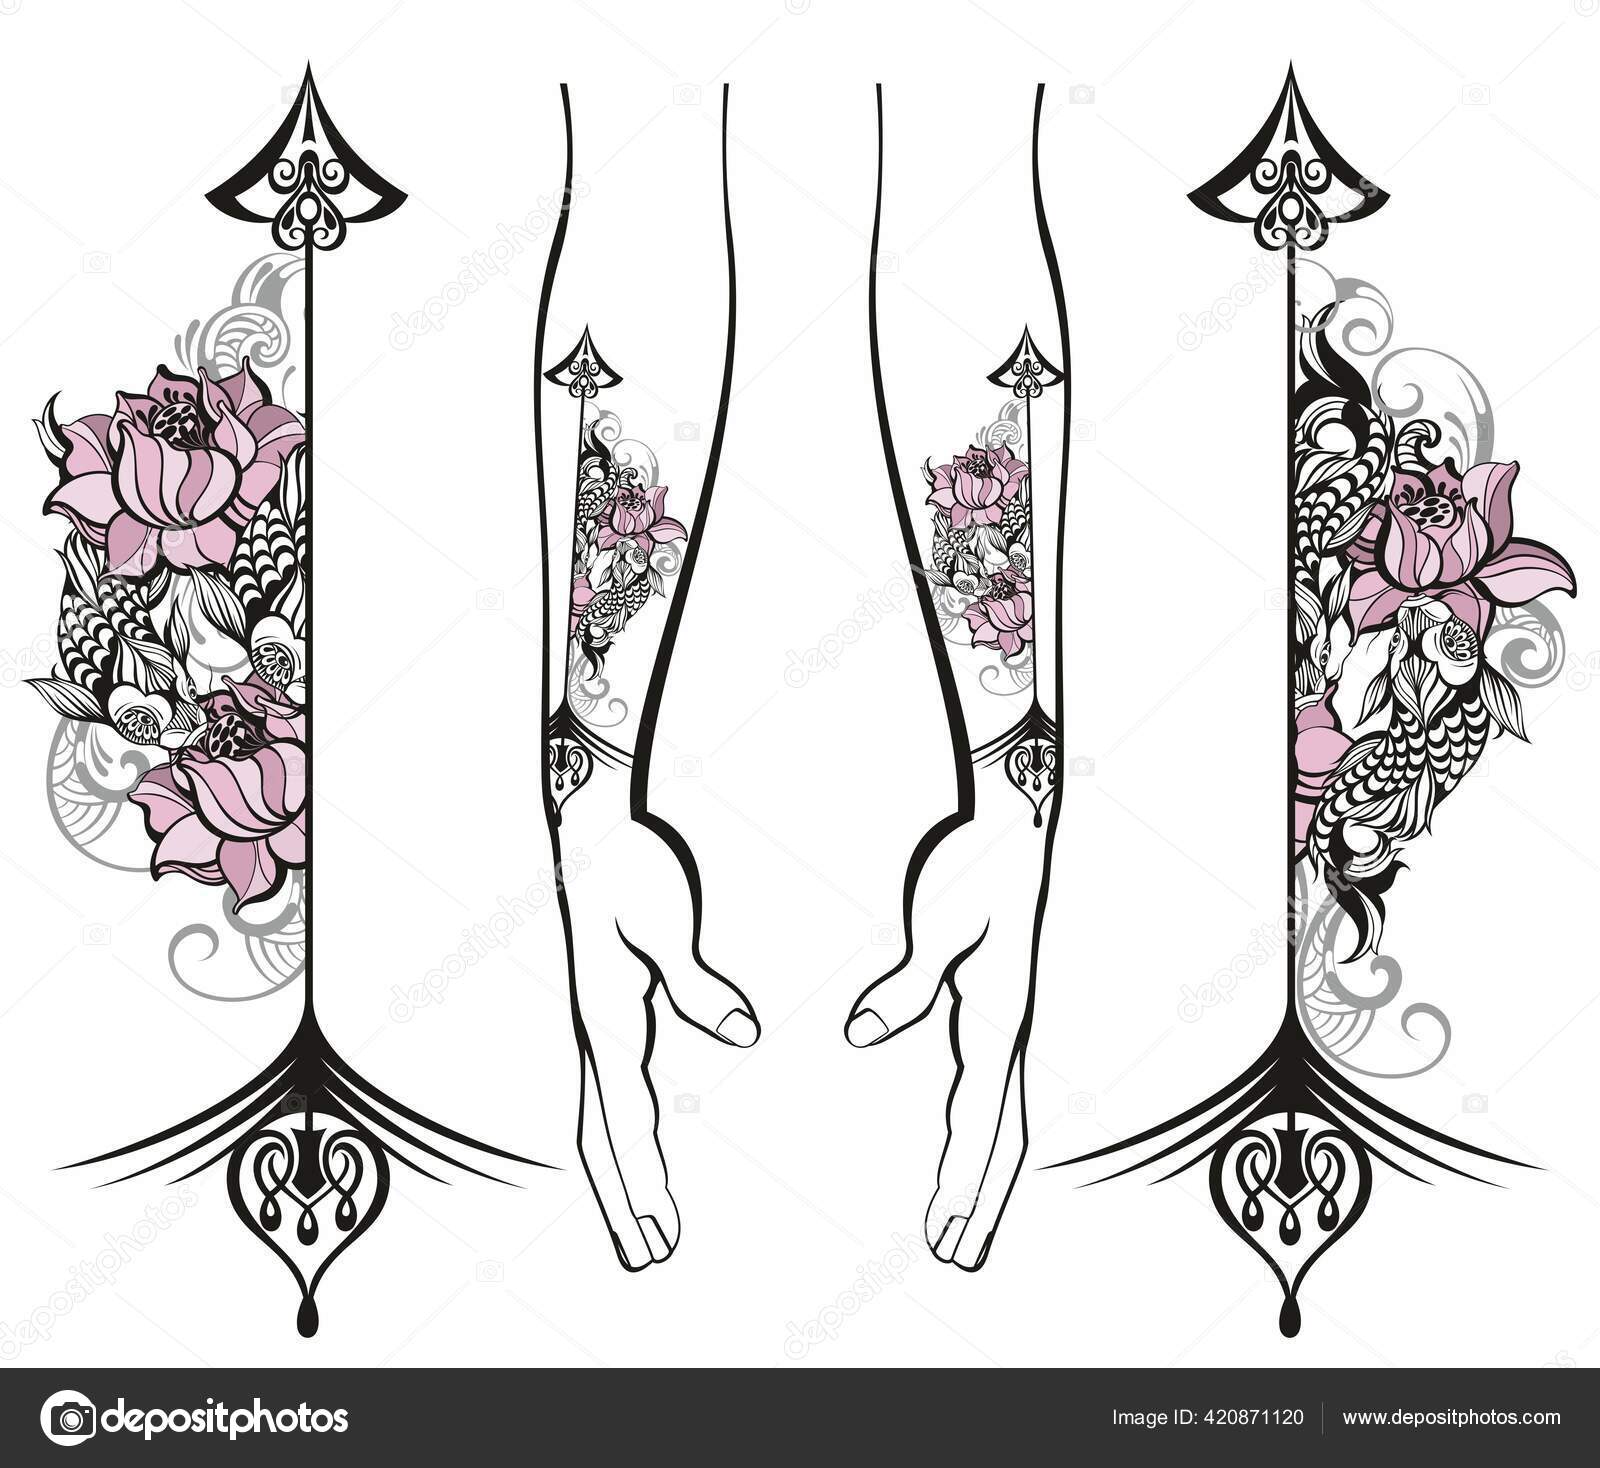 162,424 Boho Tattoo Design Royalty-Free Images, Stock Photos & Pictures |  Shutterstock